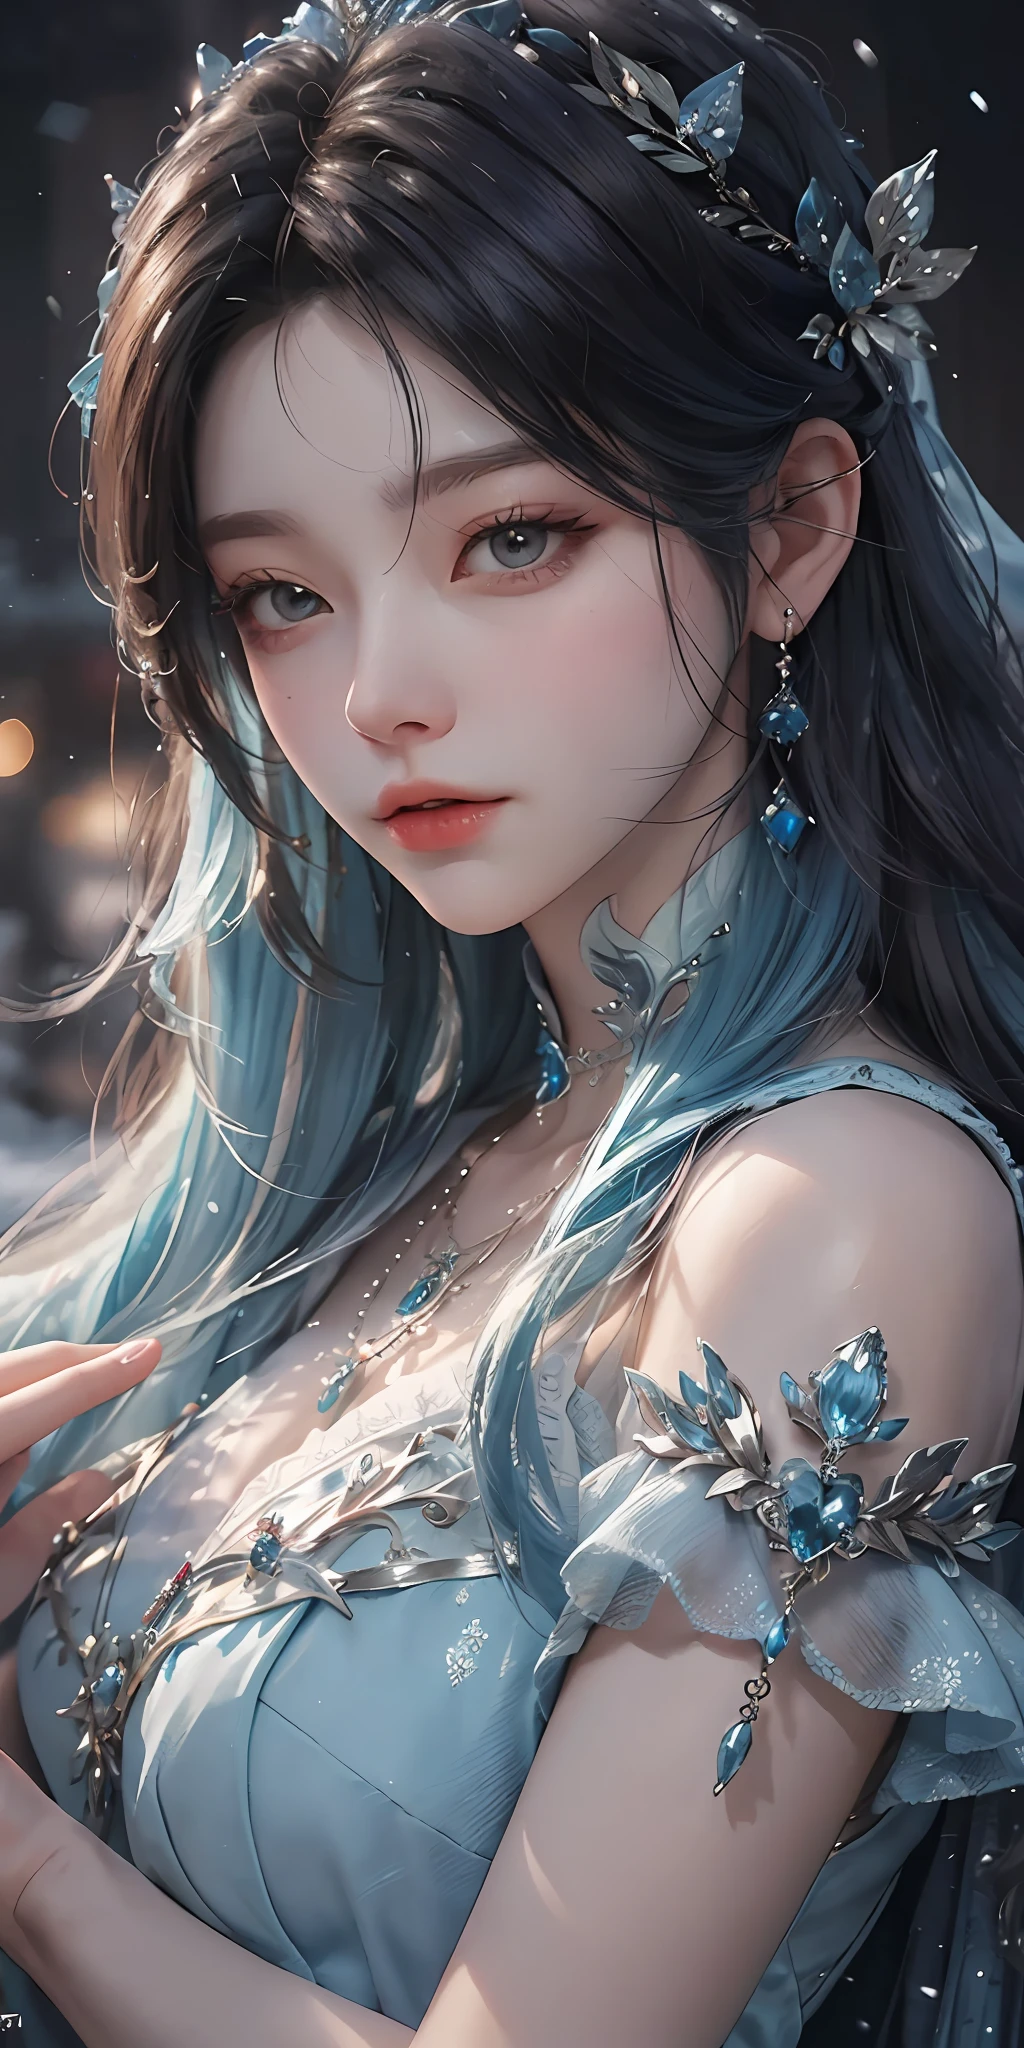 There was a woman in a blue dress，Wearing a necklace, ((a beautiful fantasy empress)), inspired by Sim Sa-jeong, Azure. detailed hairs, winter princess, Ice Princess, Guviz-style artwork, 8K)), fantasy aesthetic!, Guviz, Ice Queen, 8K high-quality detailed art